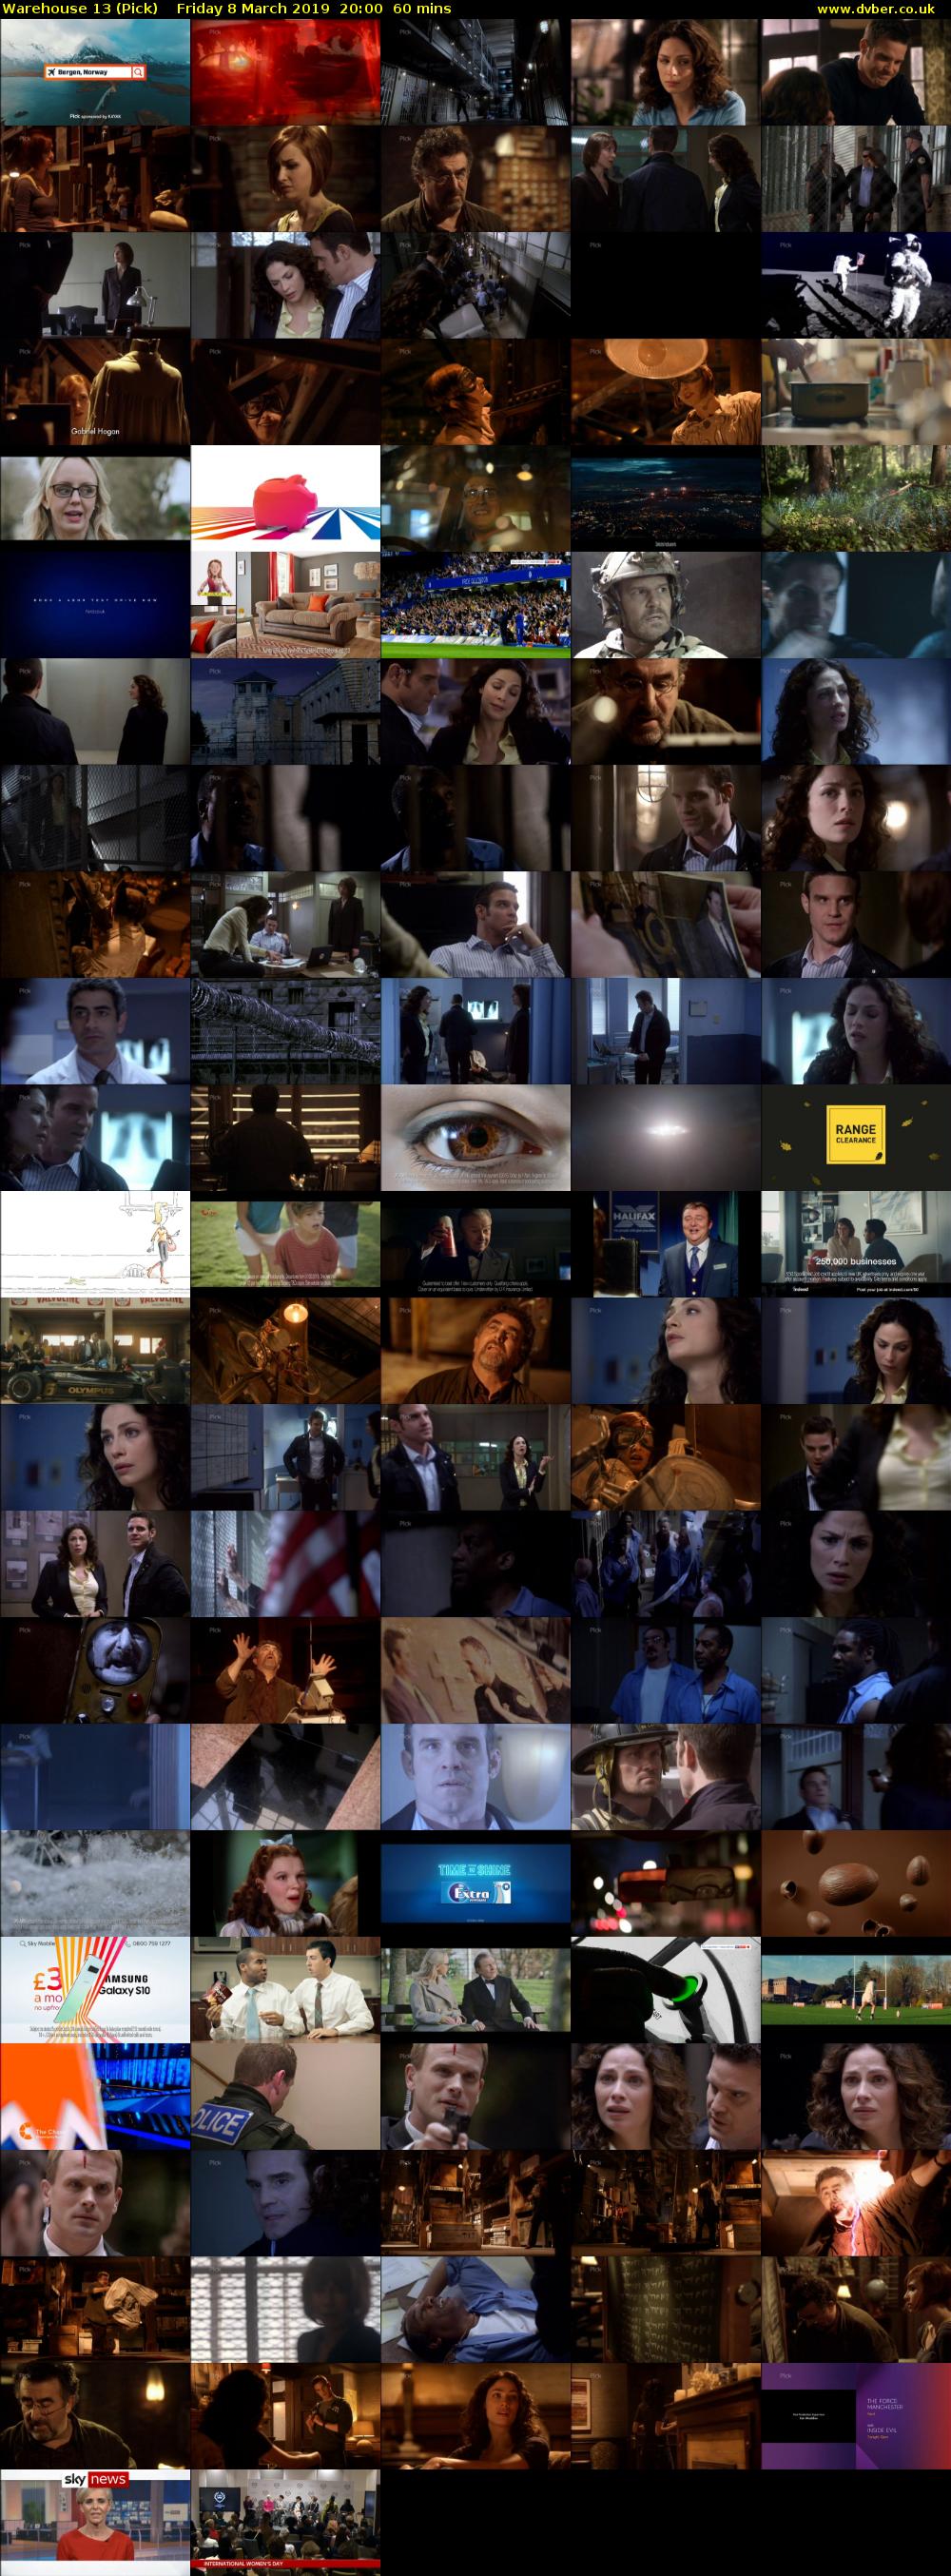 Warehouse 13 (Pick) Friday 8 March 2019 20:00 - 21:00